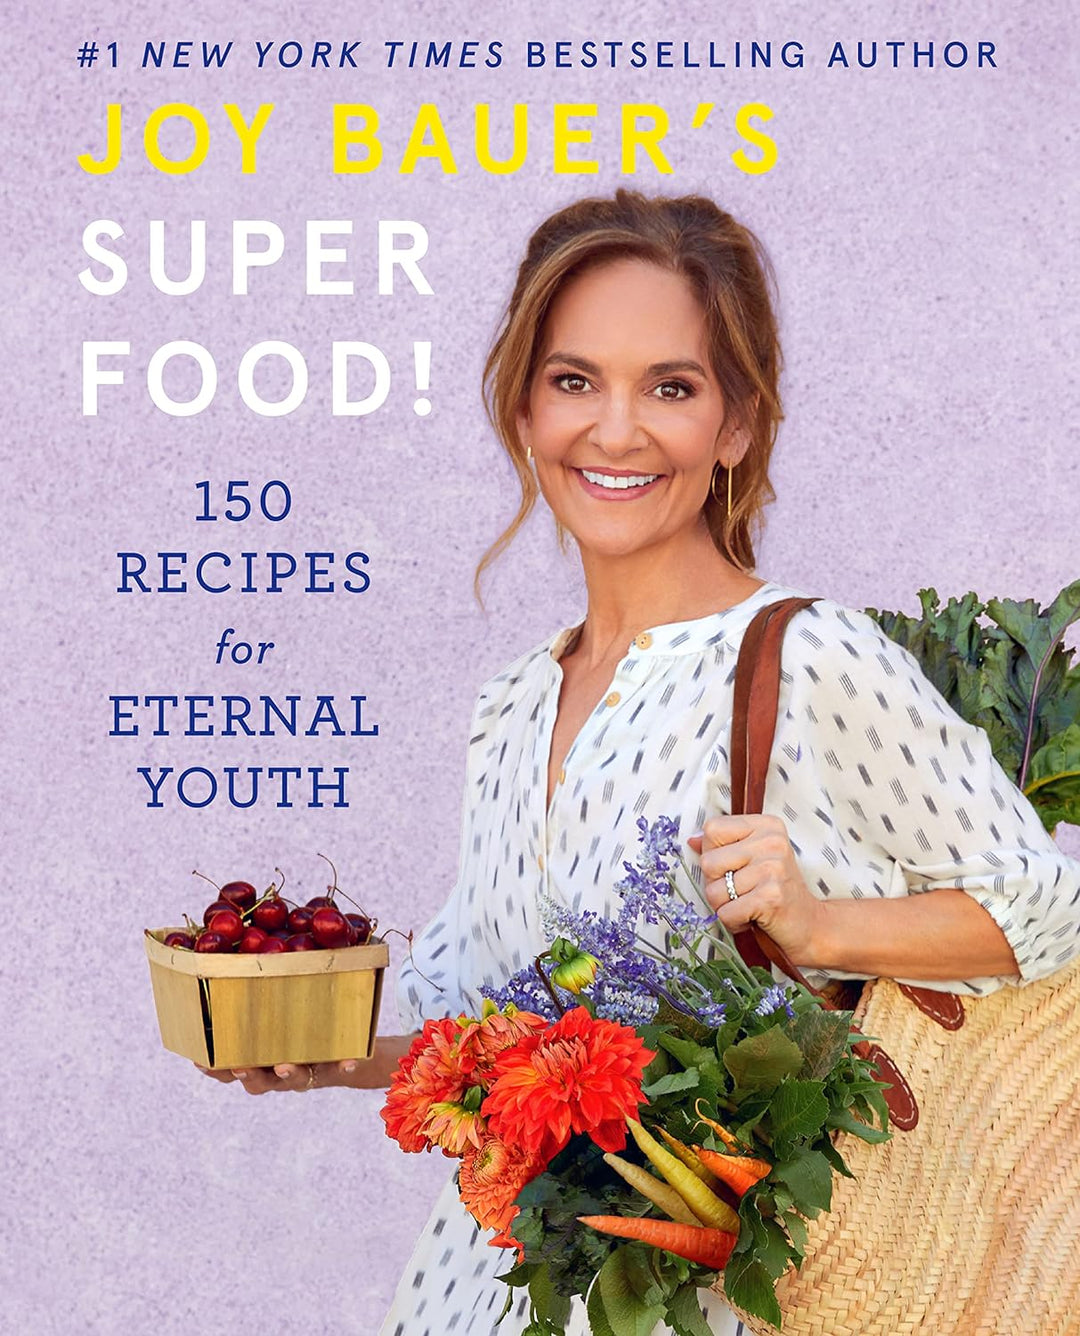 Joy Bauer's Superfood!: 150 Recipes for Eternal Youth - Hank & Sylvie's